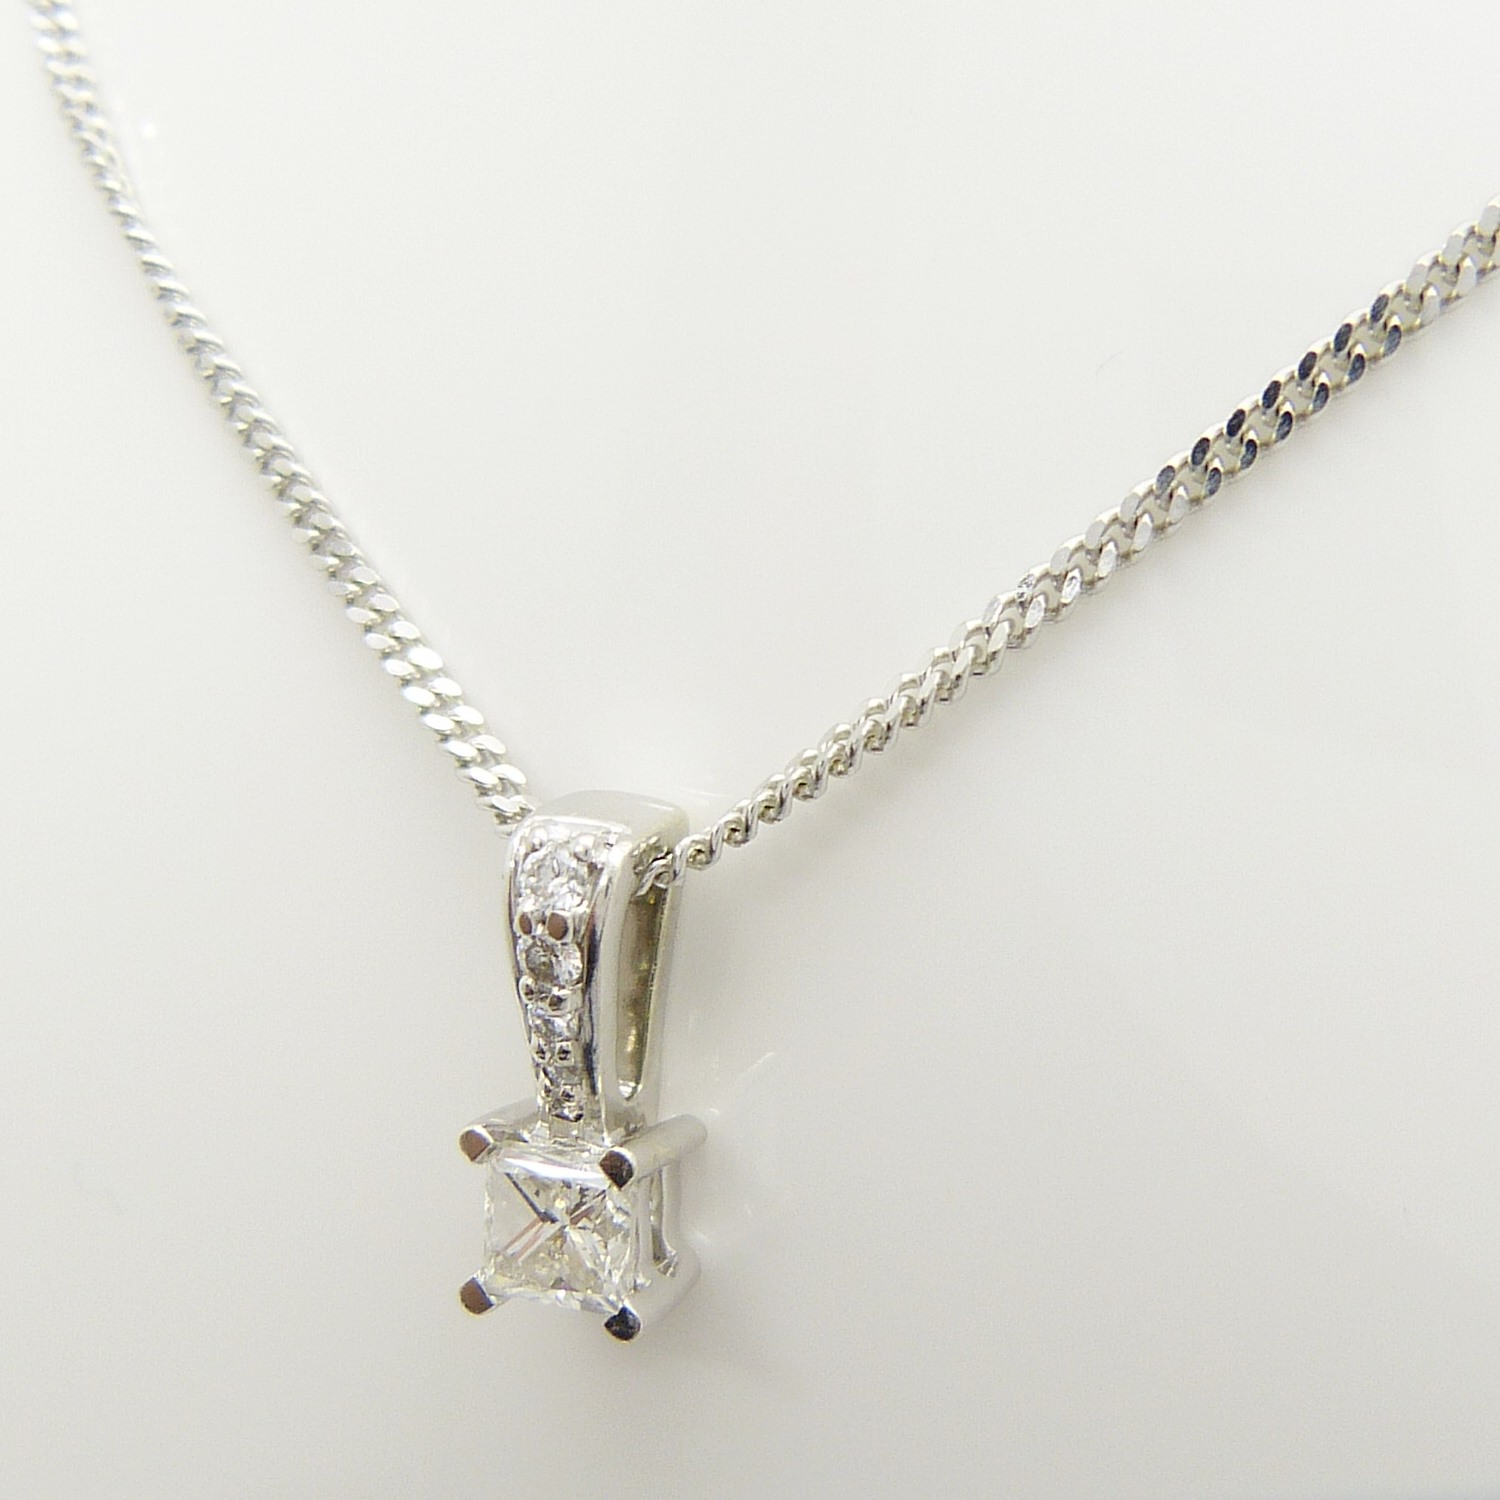 A pre-owned 0.30 carat princess-cut solitaire diamond pendant and chain, boxed